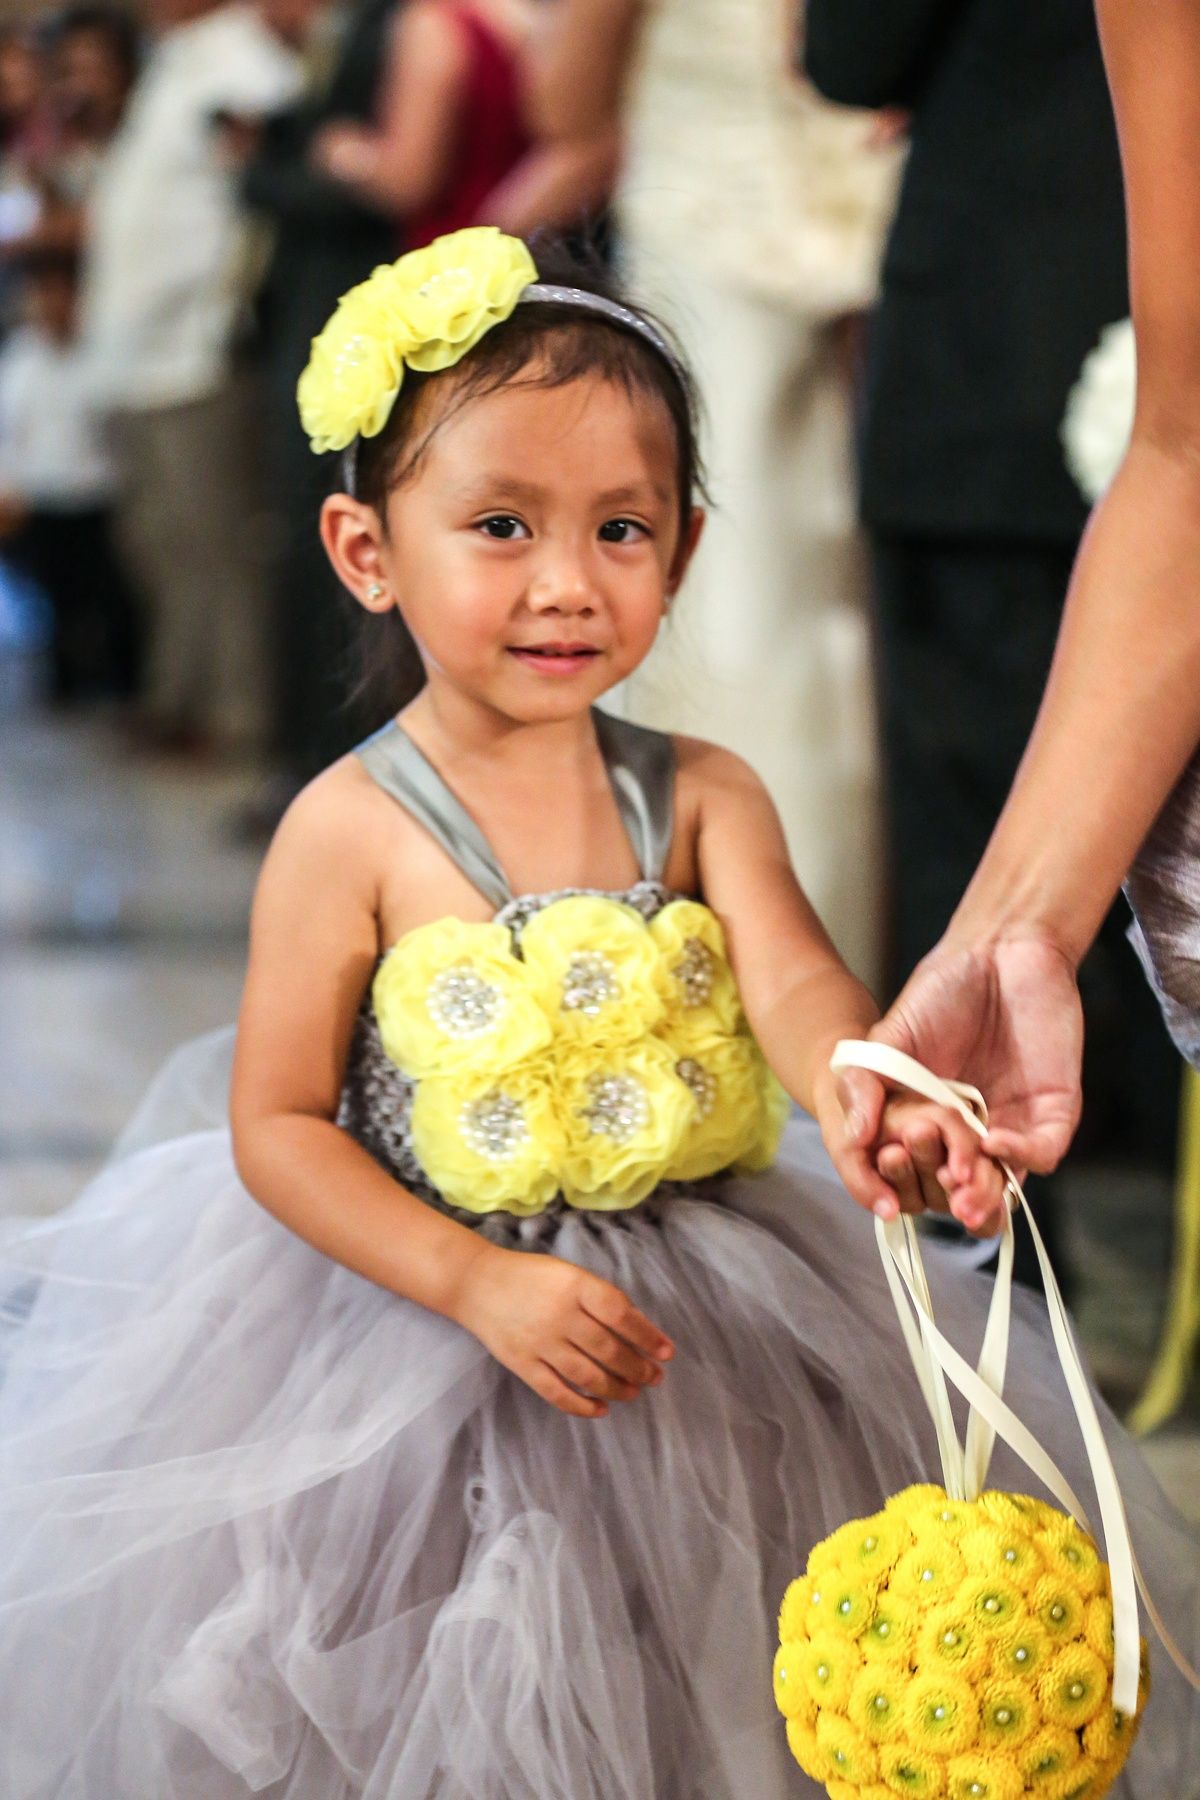 Flower girl carried bouquet of bright yellow mums with pearls at their centers.